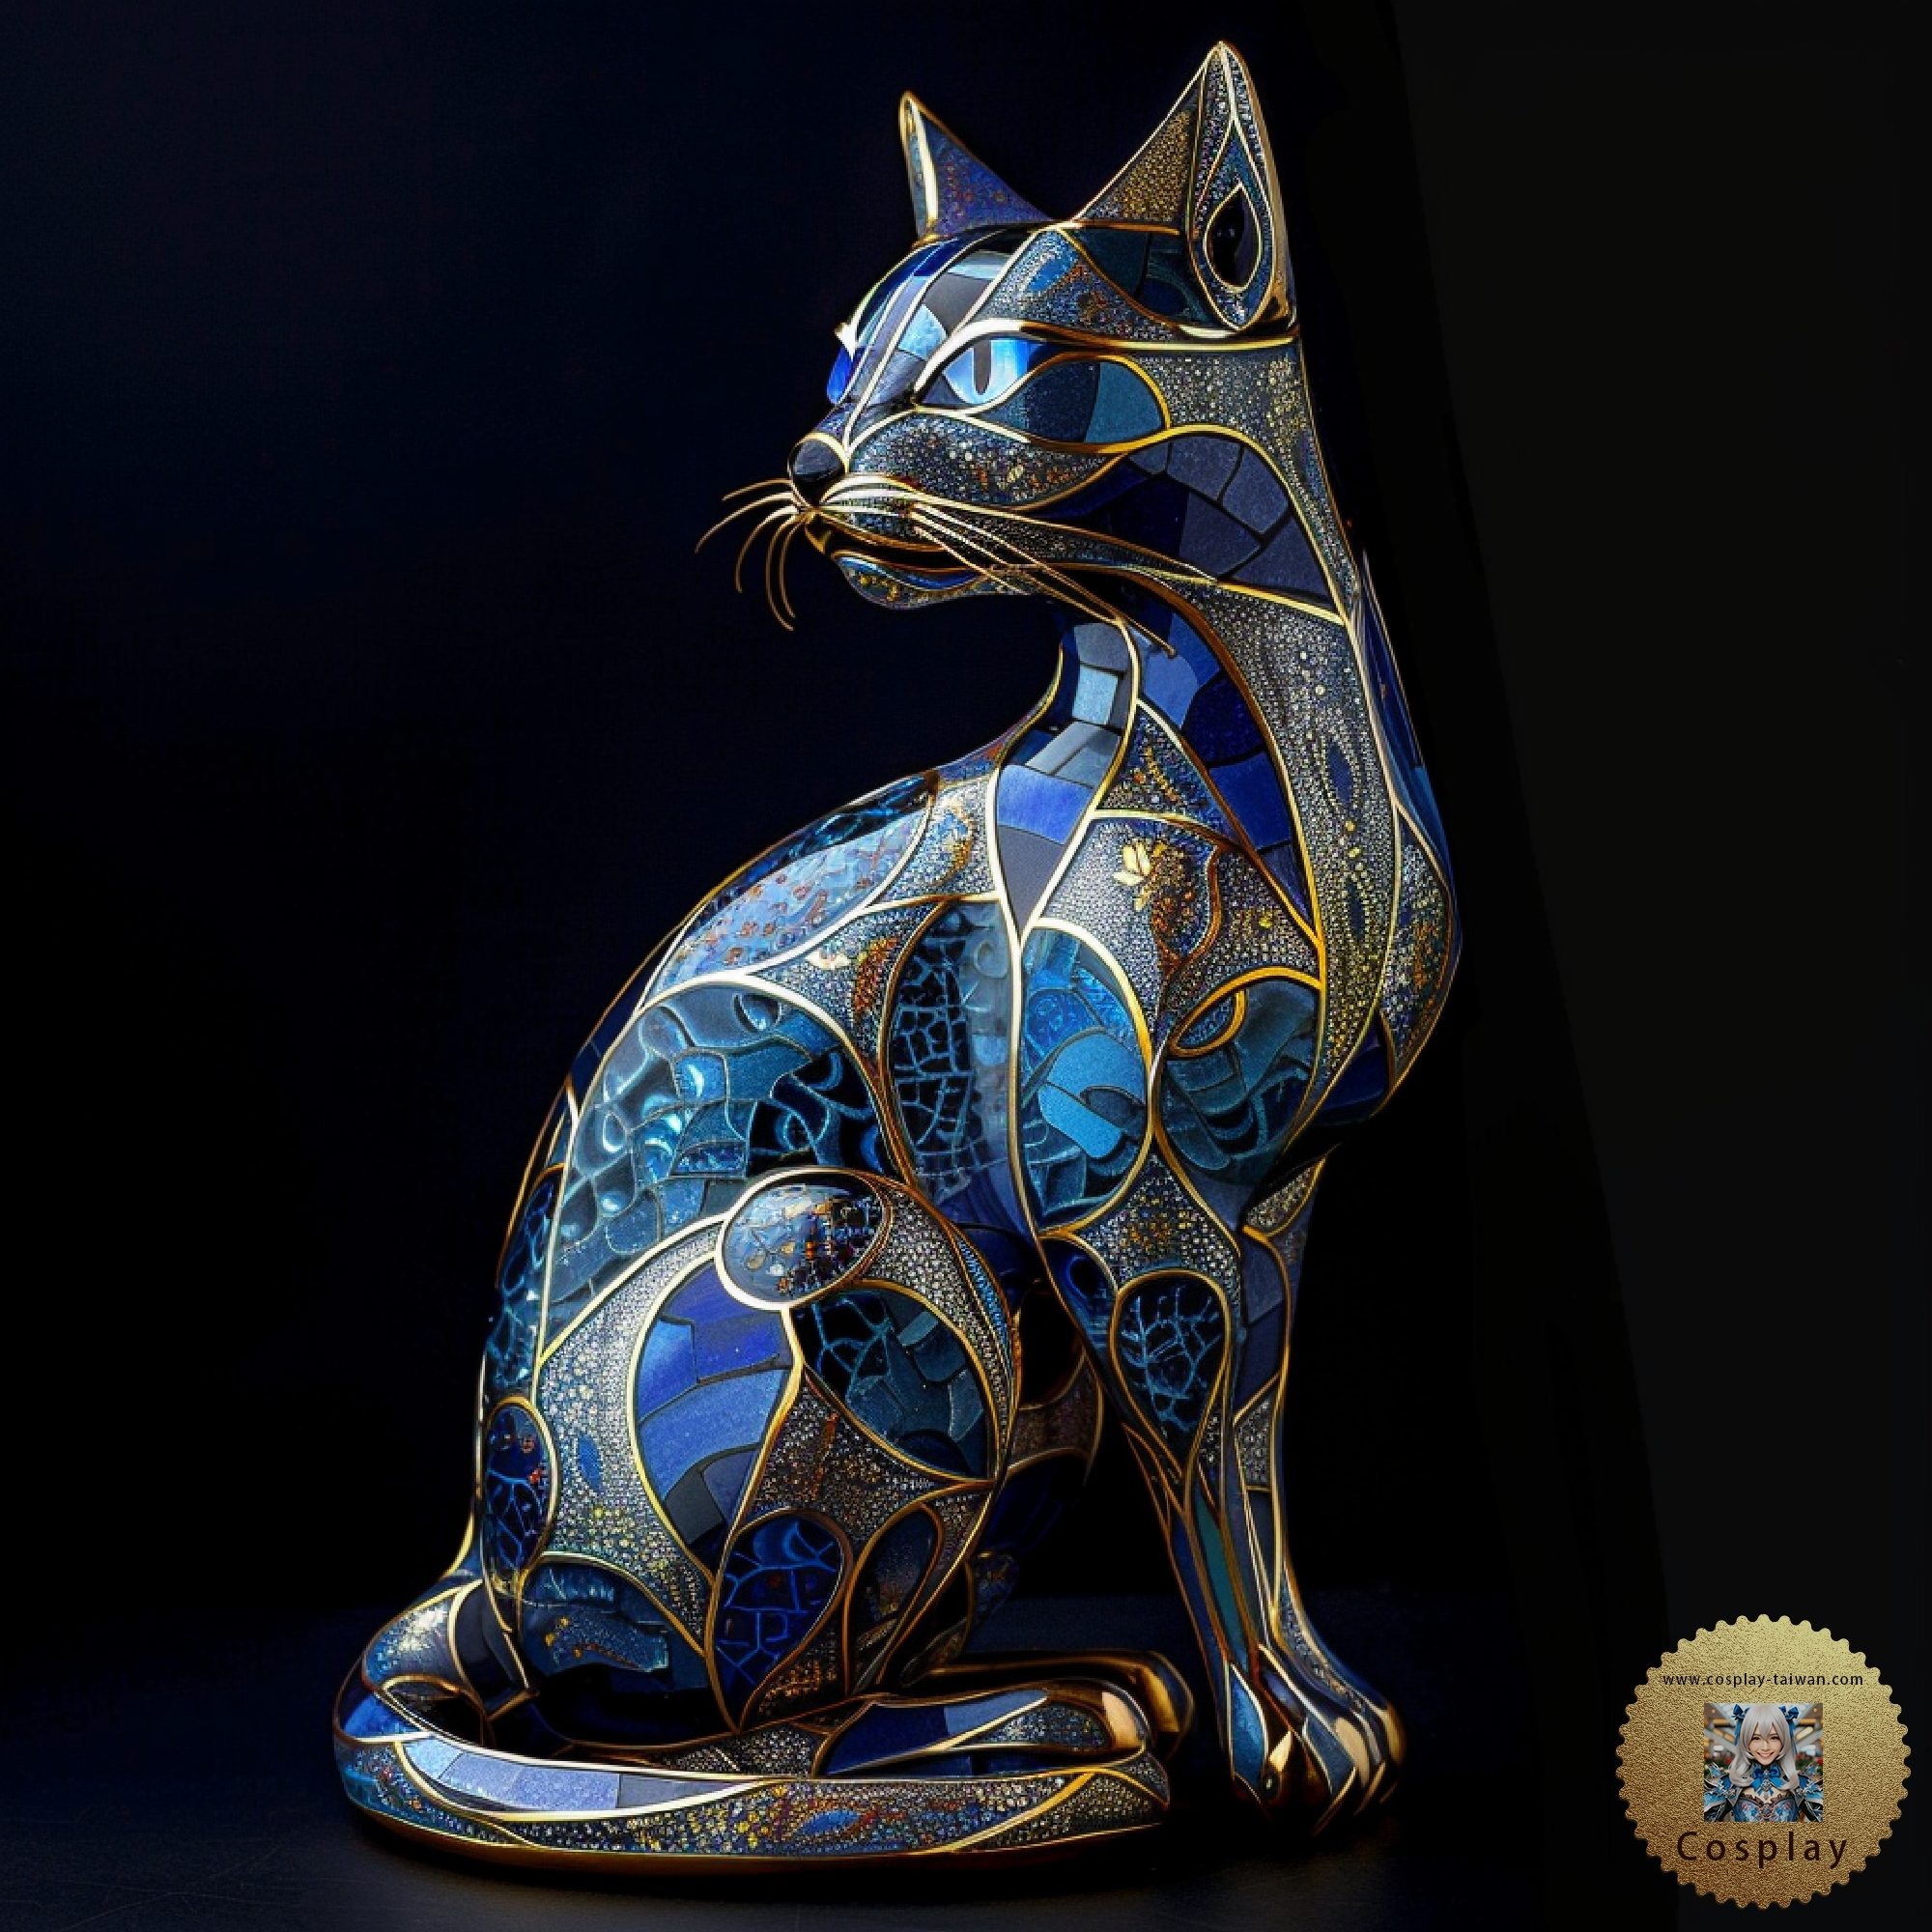 leonchou1968_This_is_an_image_of_an_ornamental_figurine_crafted_d00a5271-3212-48a7-a91a-2356379dba83.png